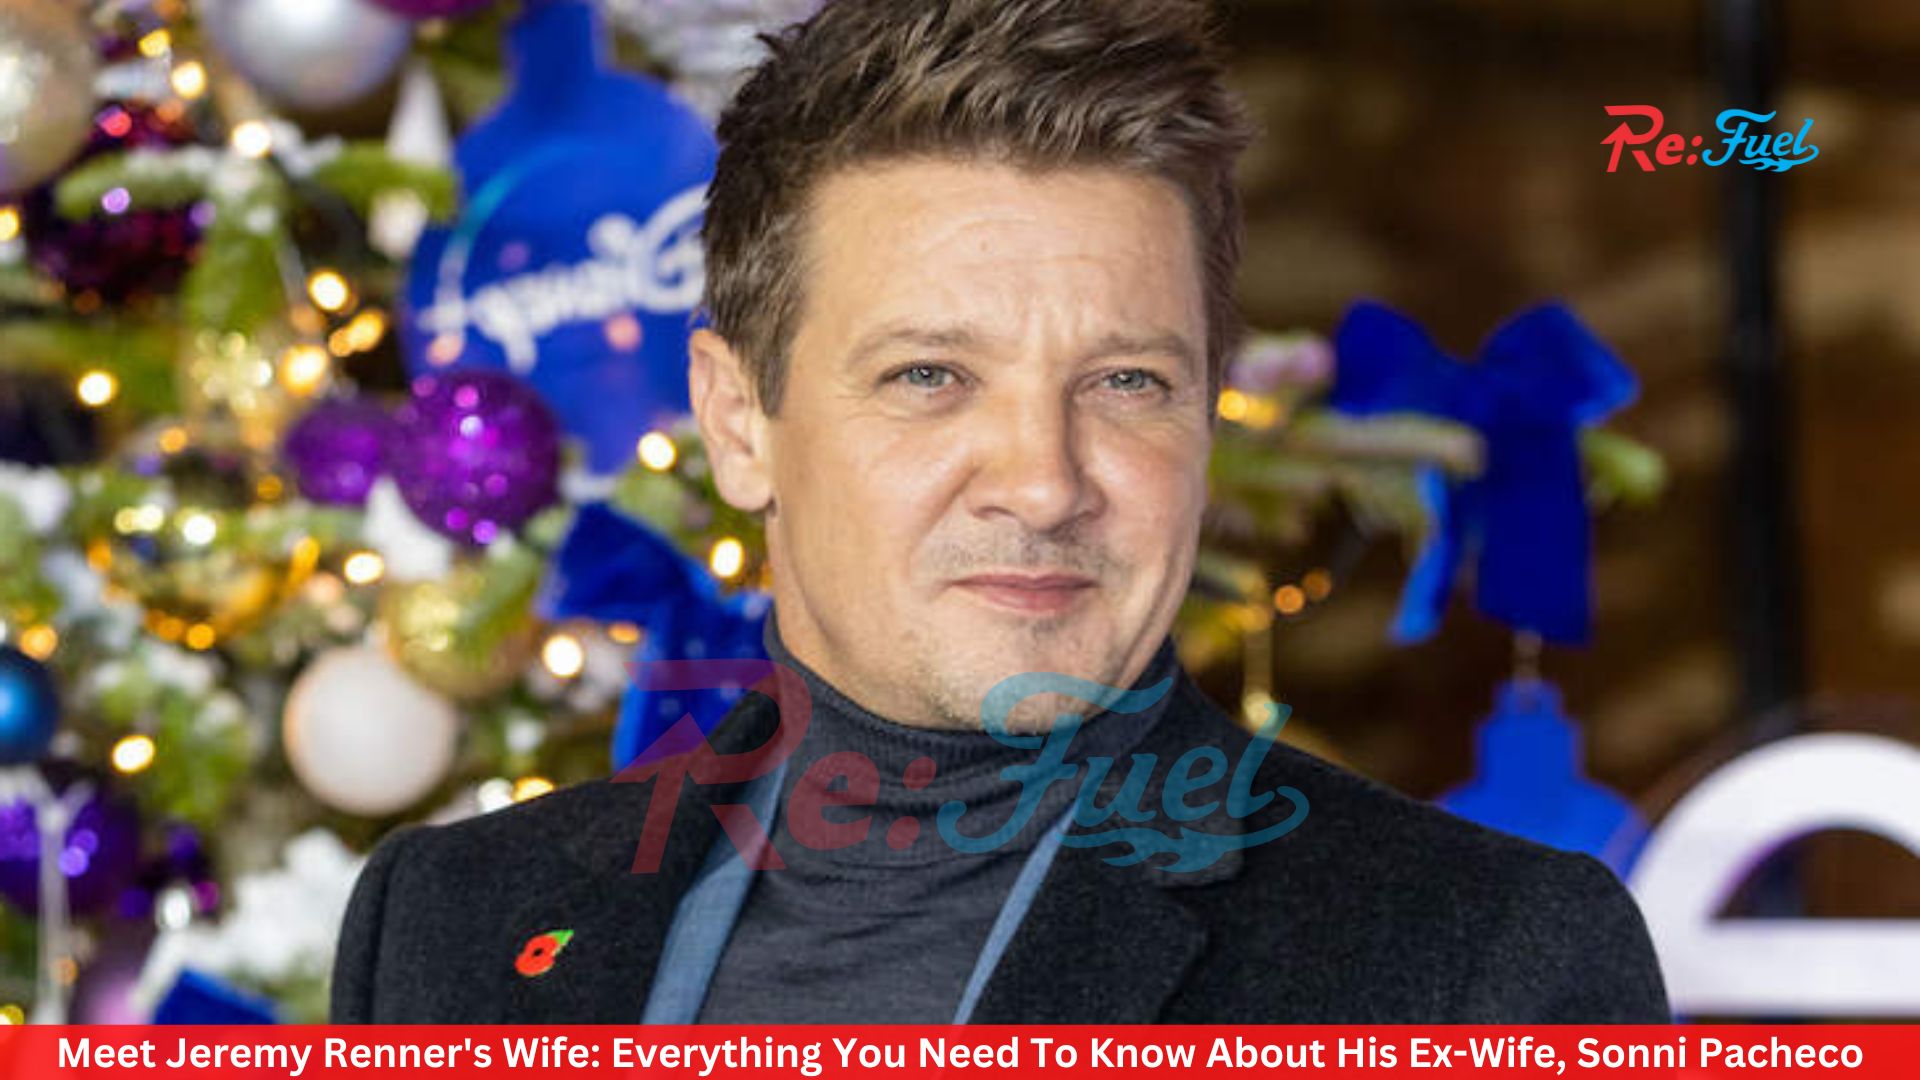 Meet Jeremy Renner's Wife: Everything You Need To Know About His Ex-Wife, Sonni Pacheco